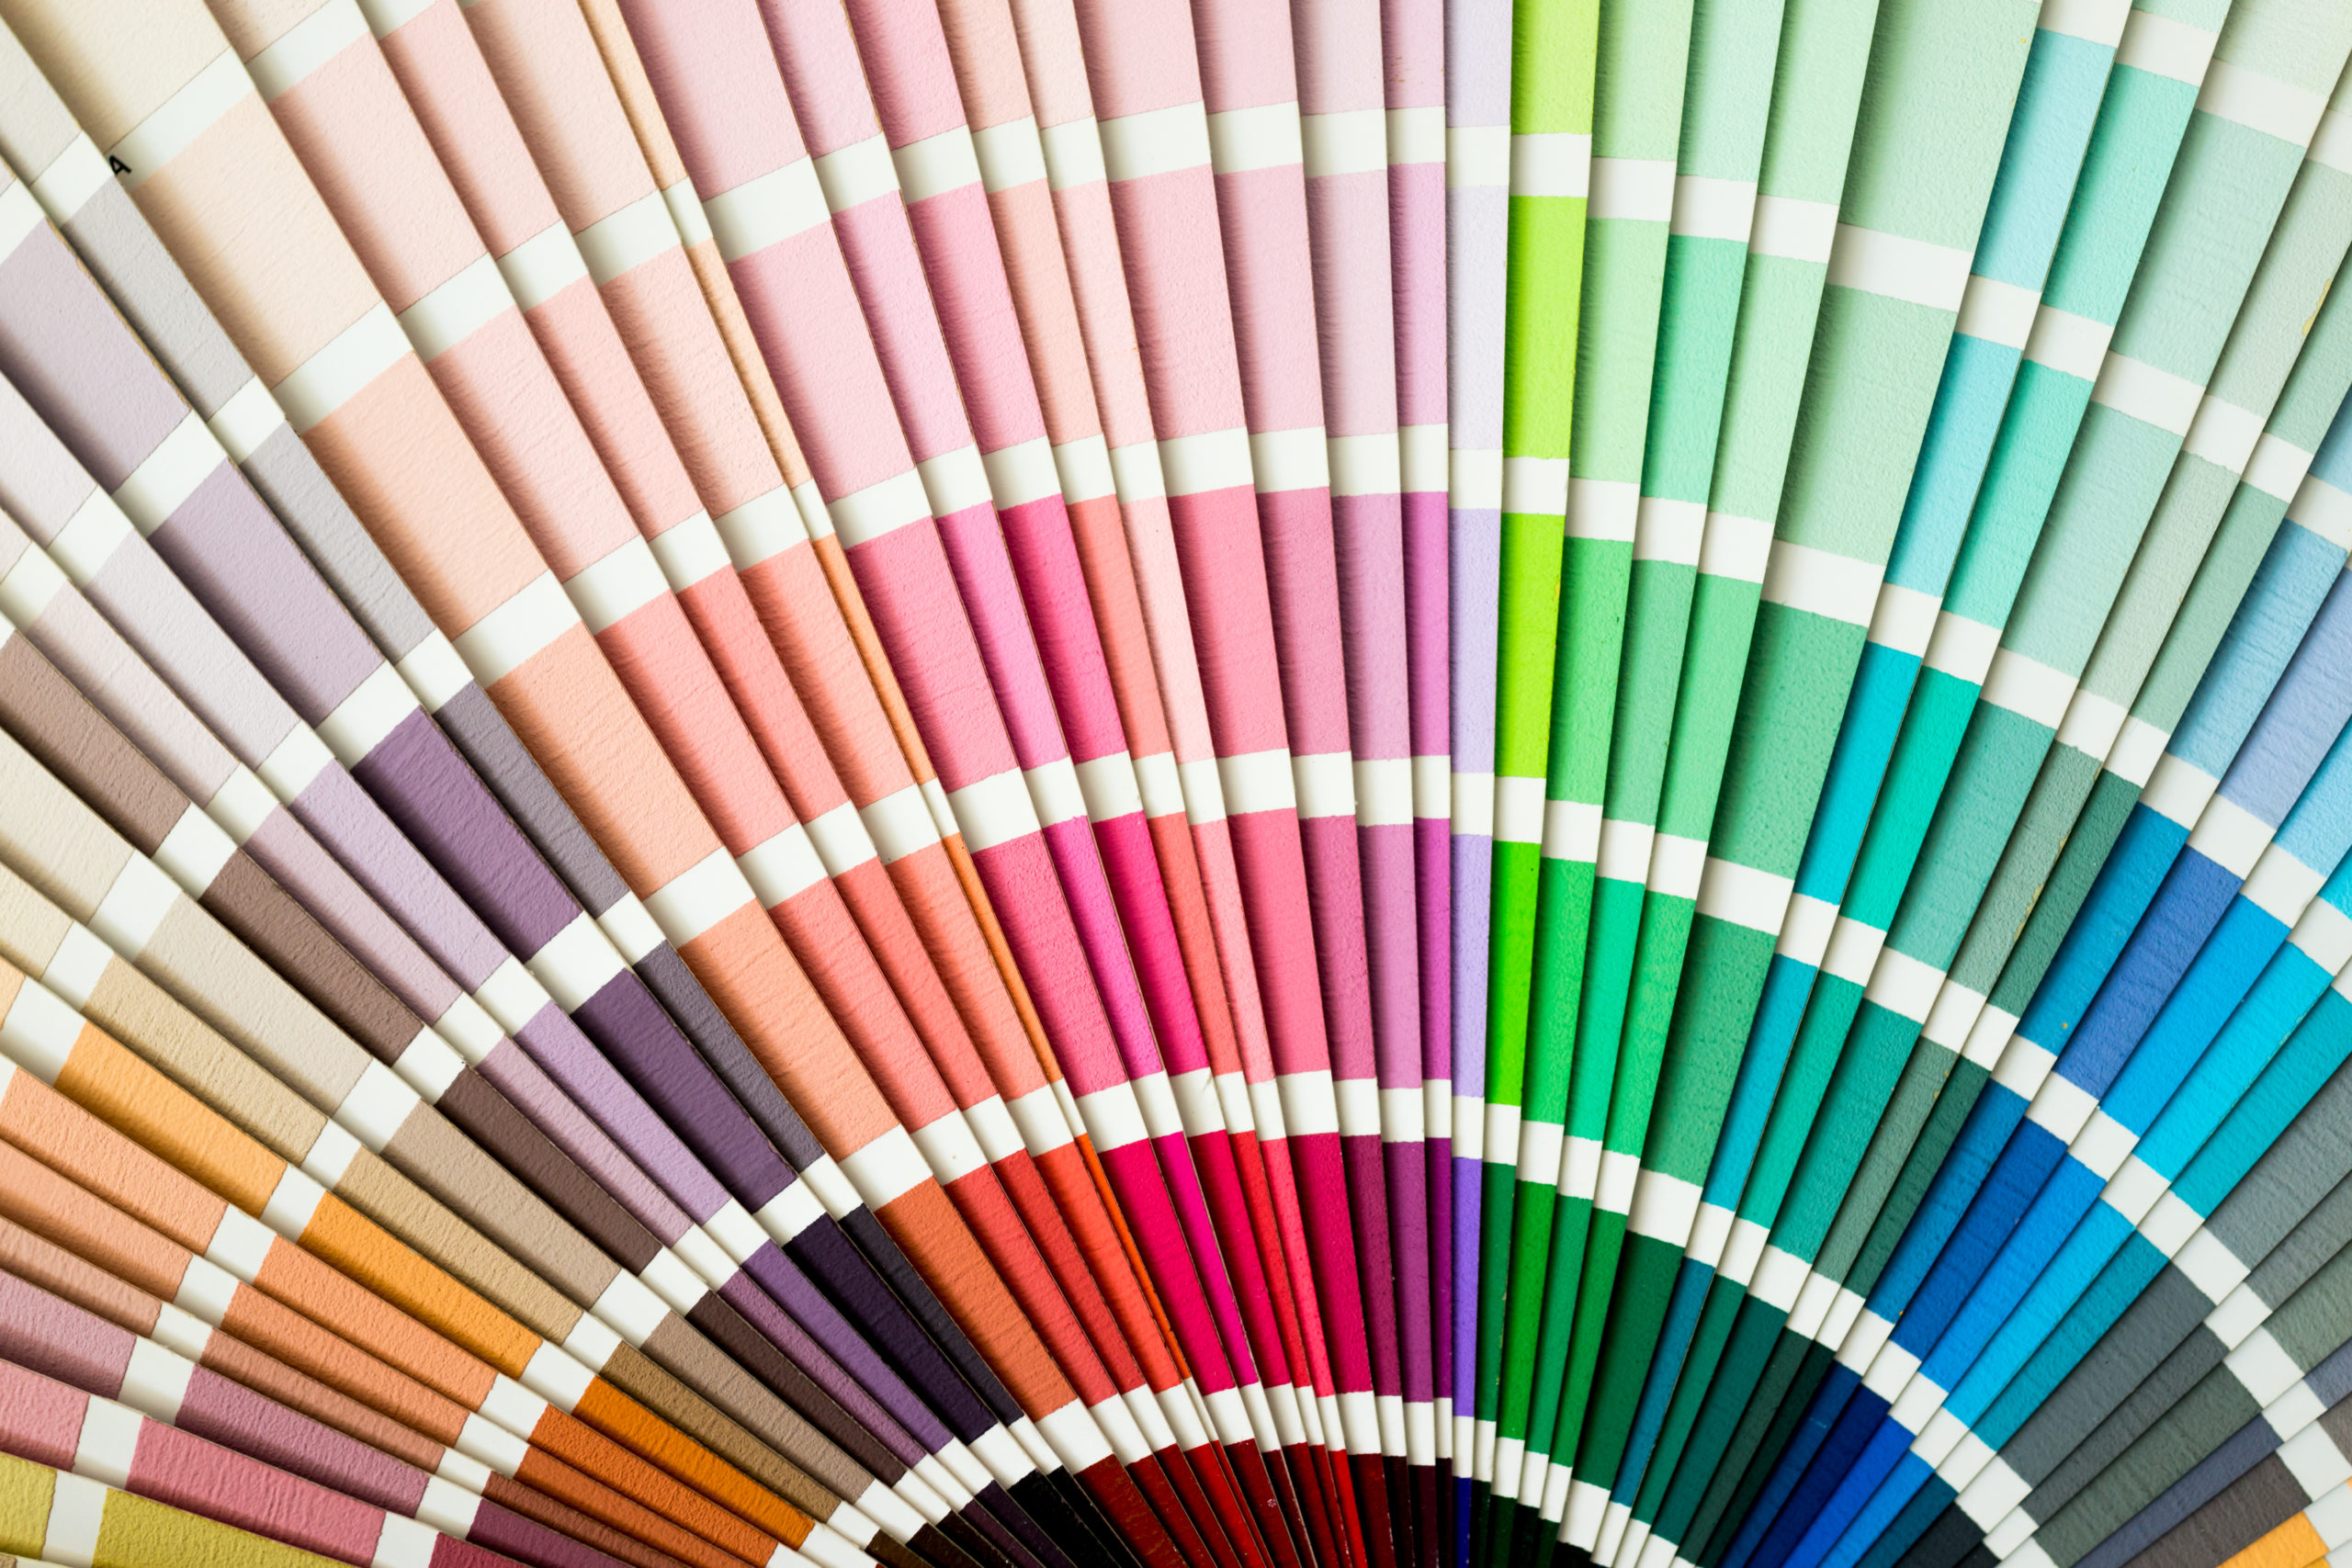 How Does Paint Color Impact Your Home?